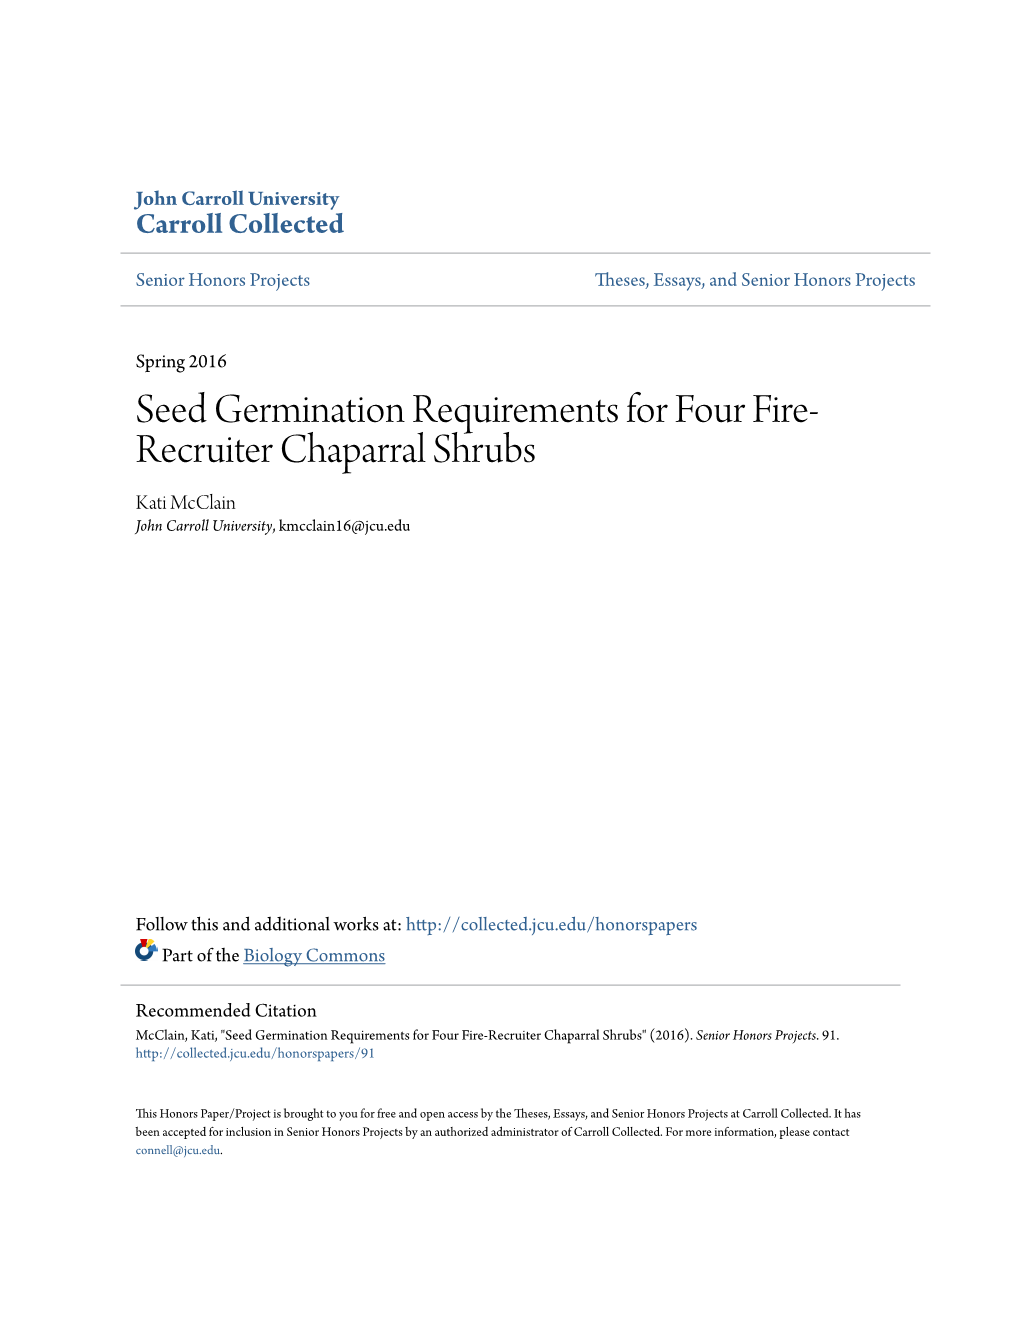 Seed Germination Requirements for Four Fire-Recruiter Chaparral Shrubs" (2016)